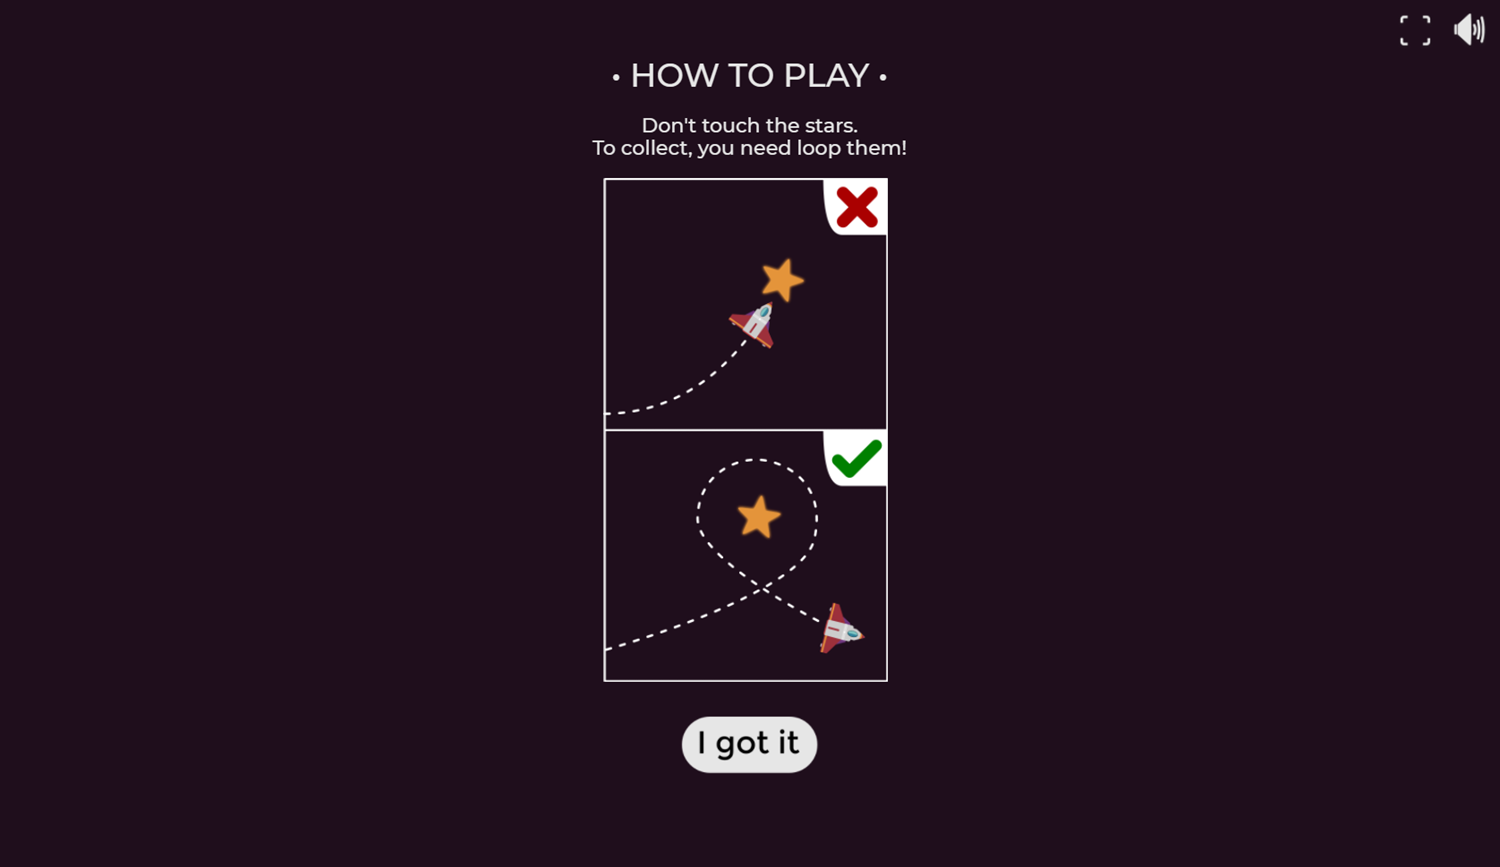 Loop Them Game How To Play Screenshot.